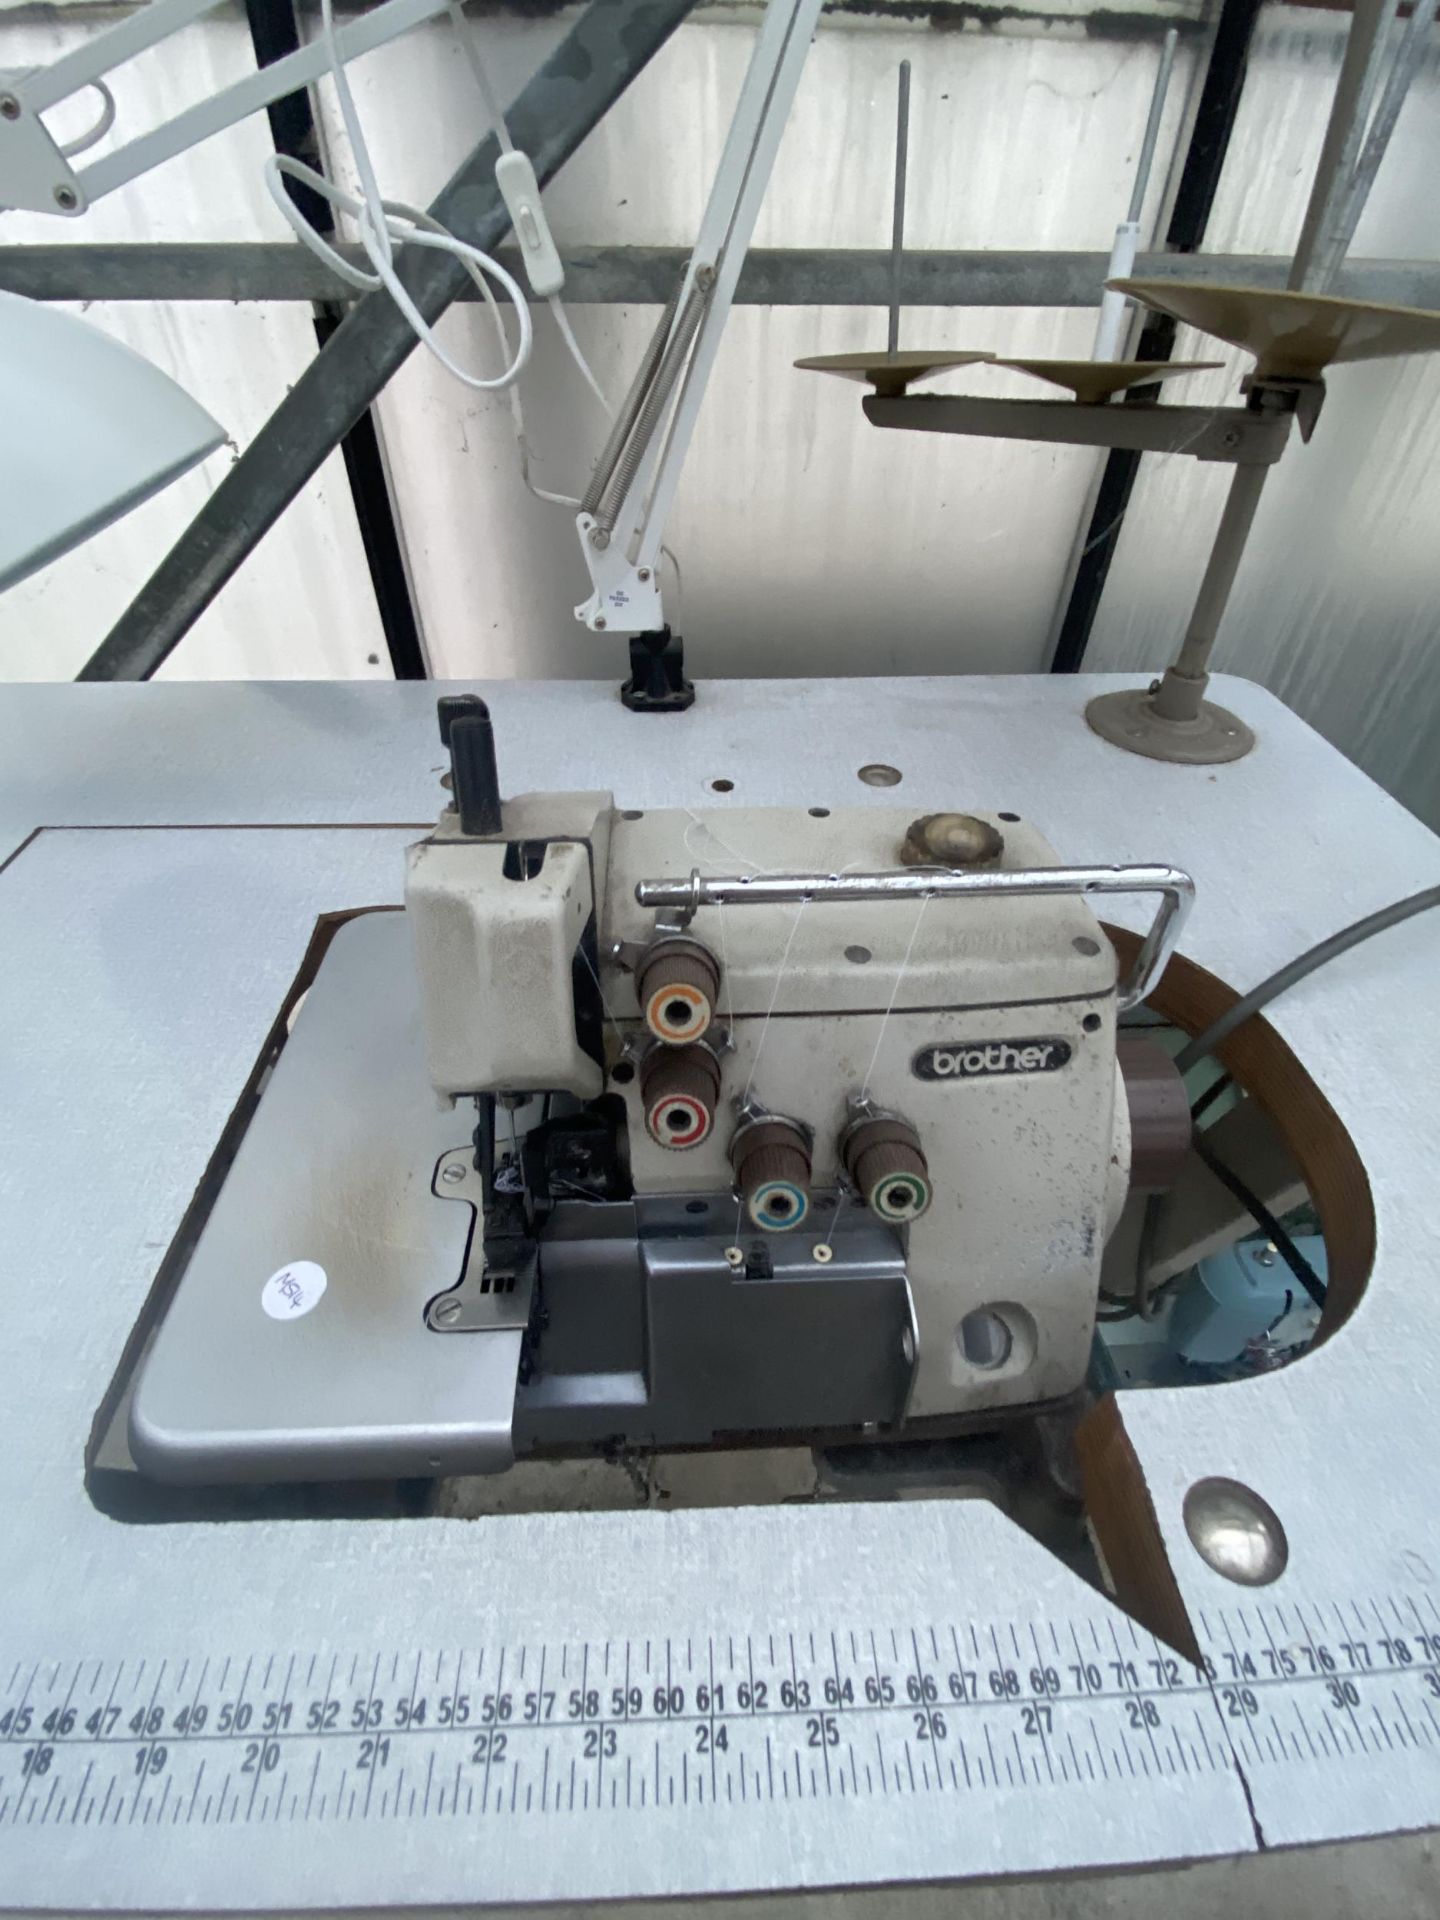 A BROTHER INDUSTRIAL OVERLOCKER SEWING MACHINE WITH TREADLE BASE AND ANGLE POISE LAMP - Image 2 of 3